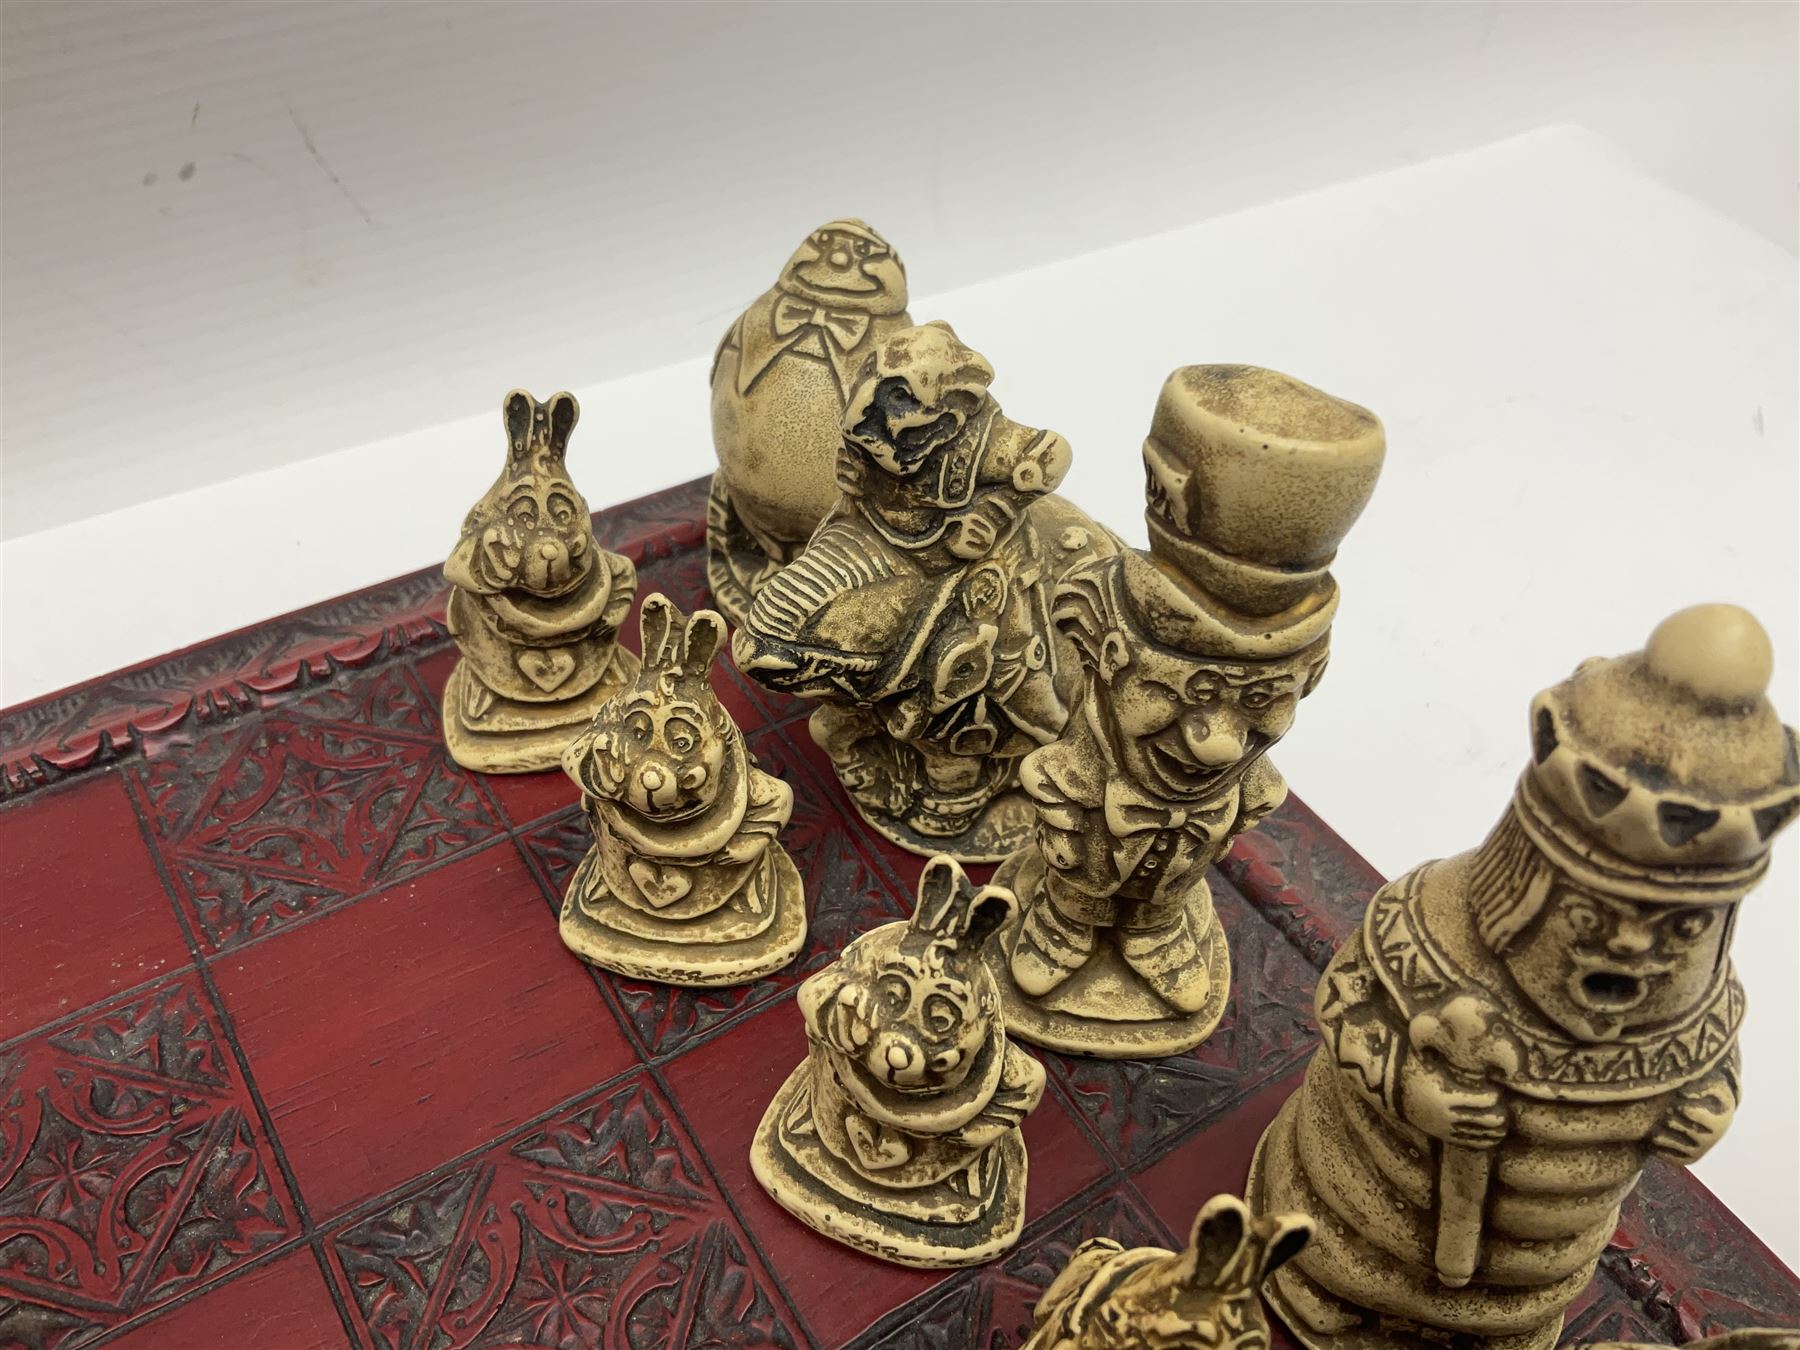 Alice in Wonderland themed chess set - Image 4 of 11